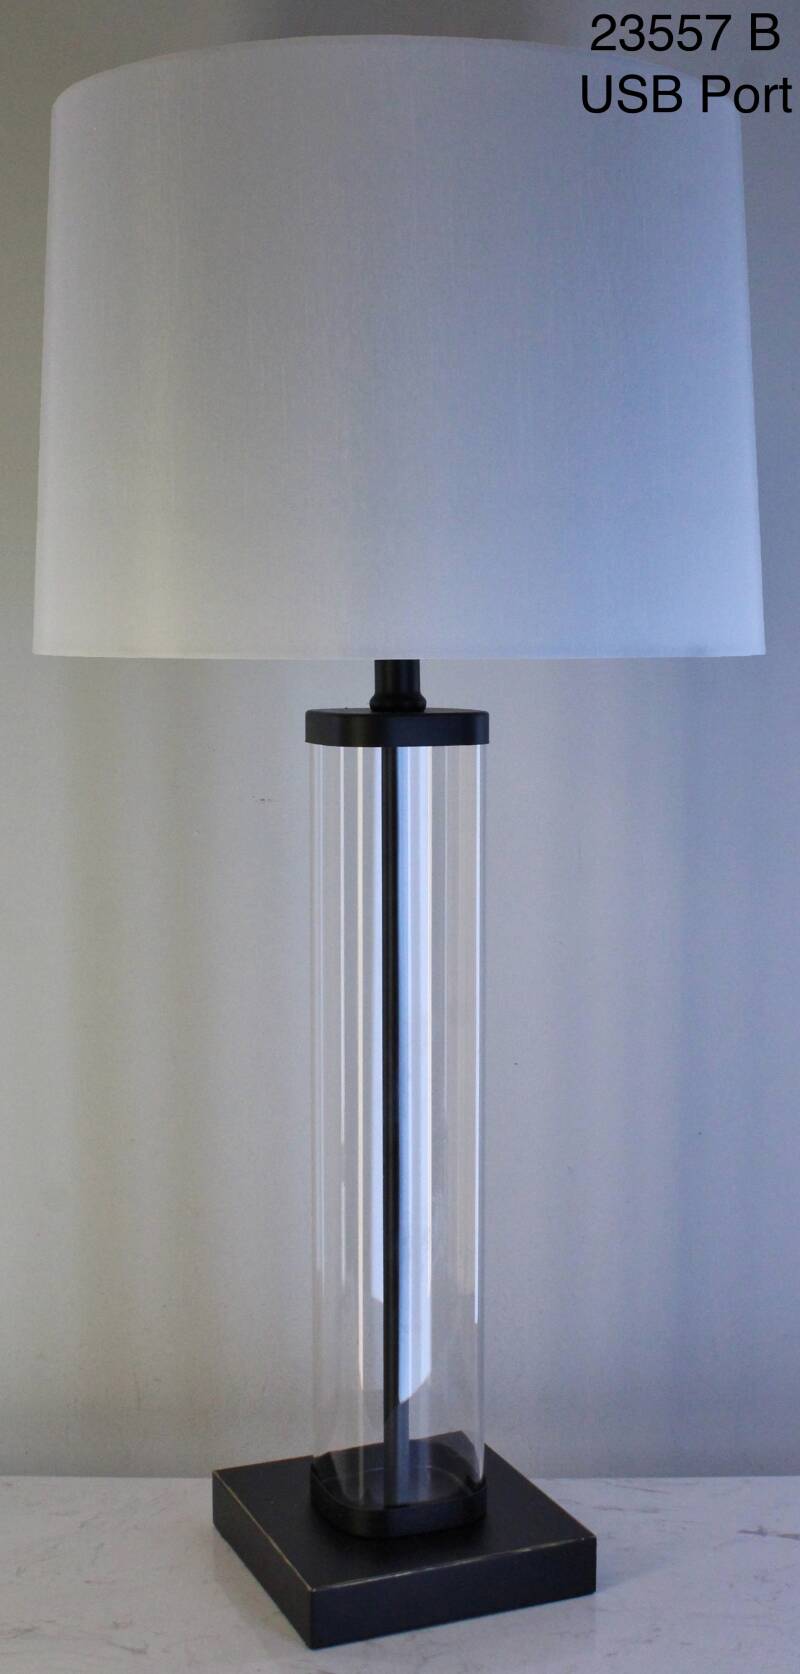 Glass Table Lamp with USB Port by Home Accents 23557B